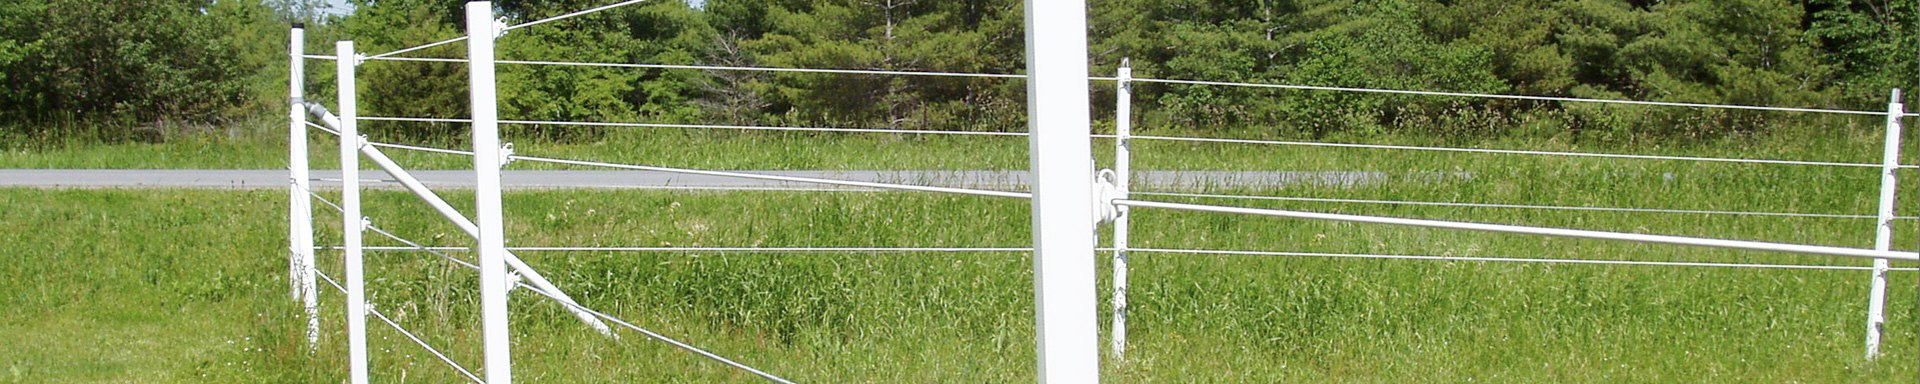 Fence Systems | MunroKennels.com | Munro Industries mk-10090412